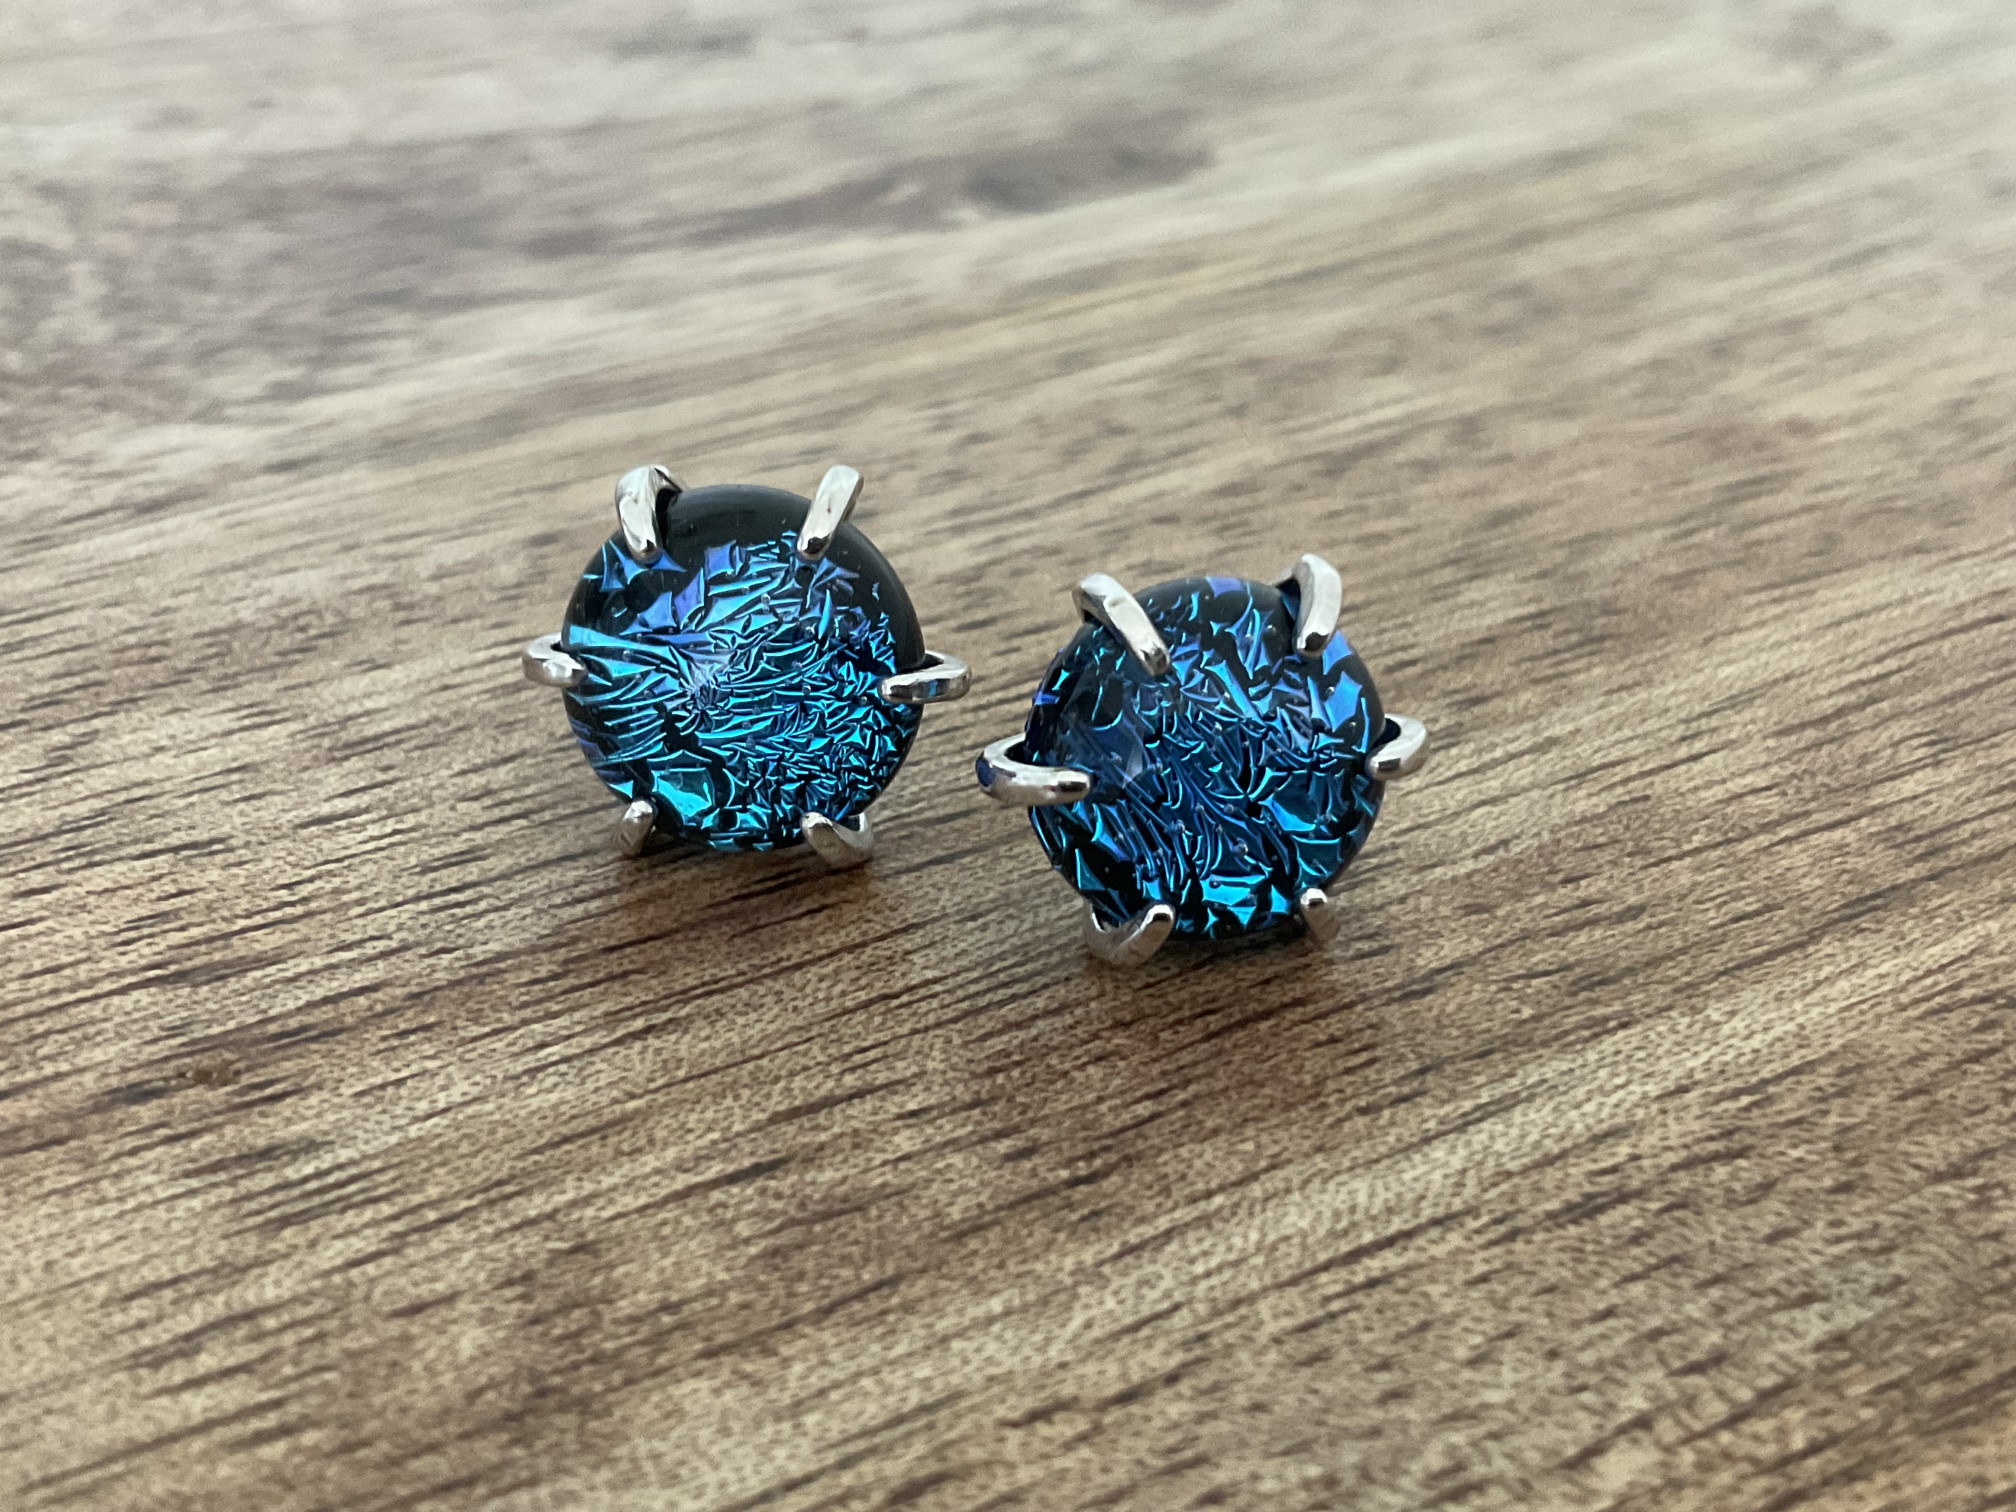 Blue Cracklized Dichroic Fused Glass Stud Earrings